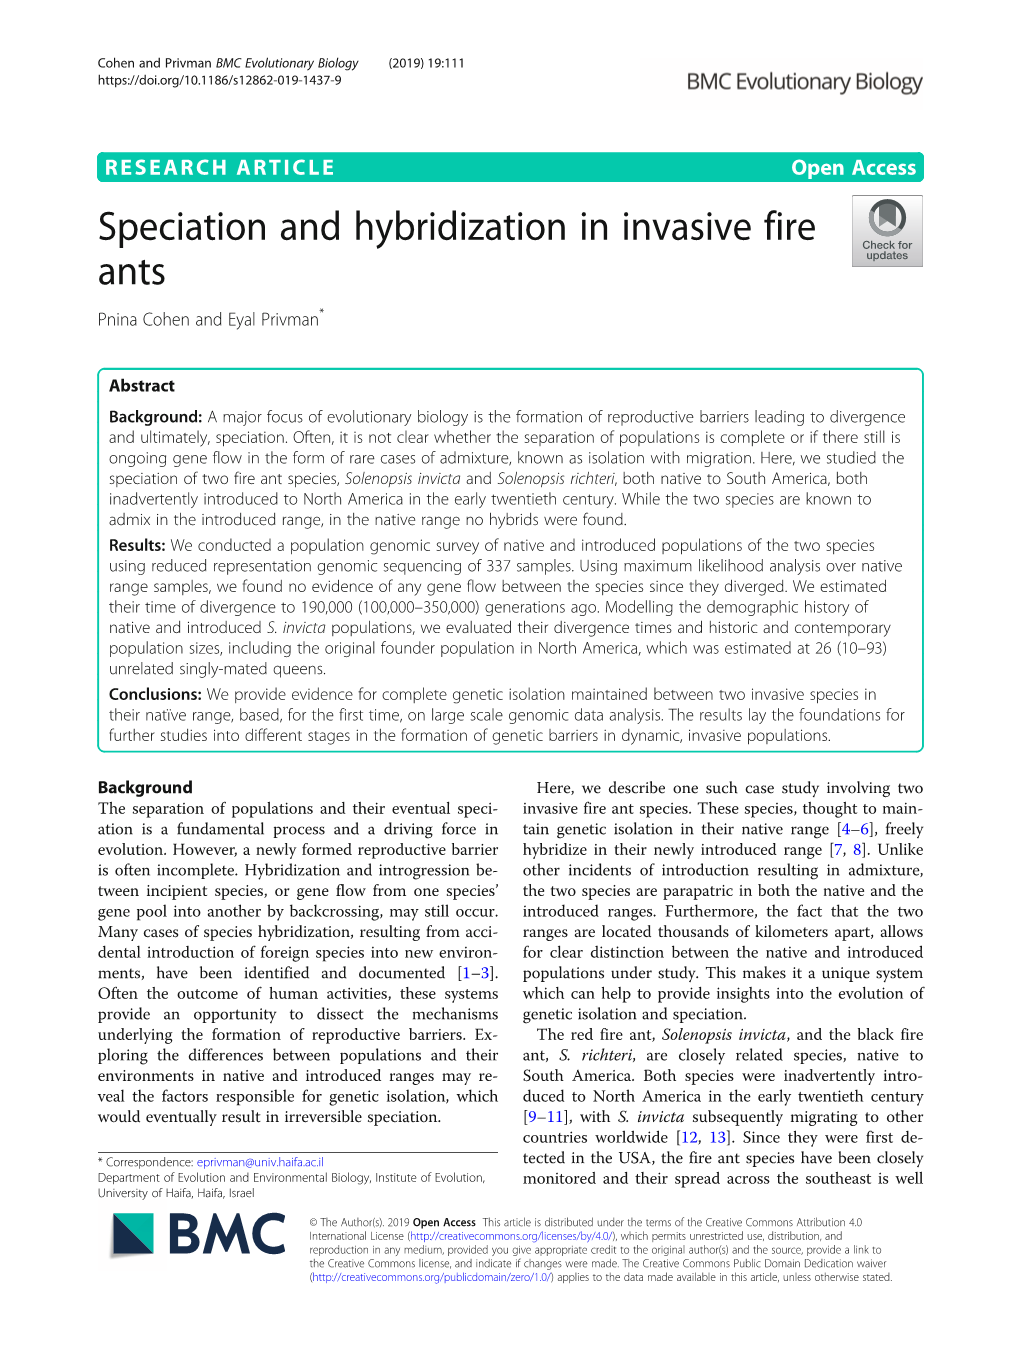 Speciation and Hybridization in Invasive Fire Ants Pnina Cohen and Eyal Privman*